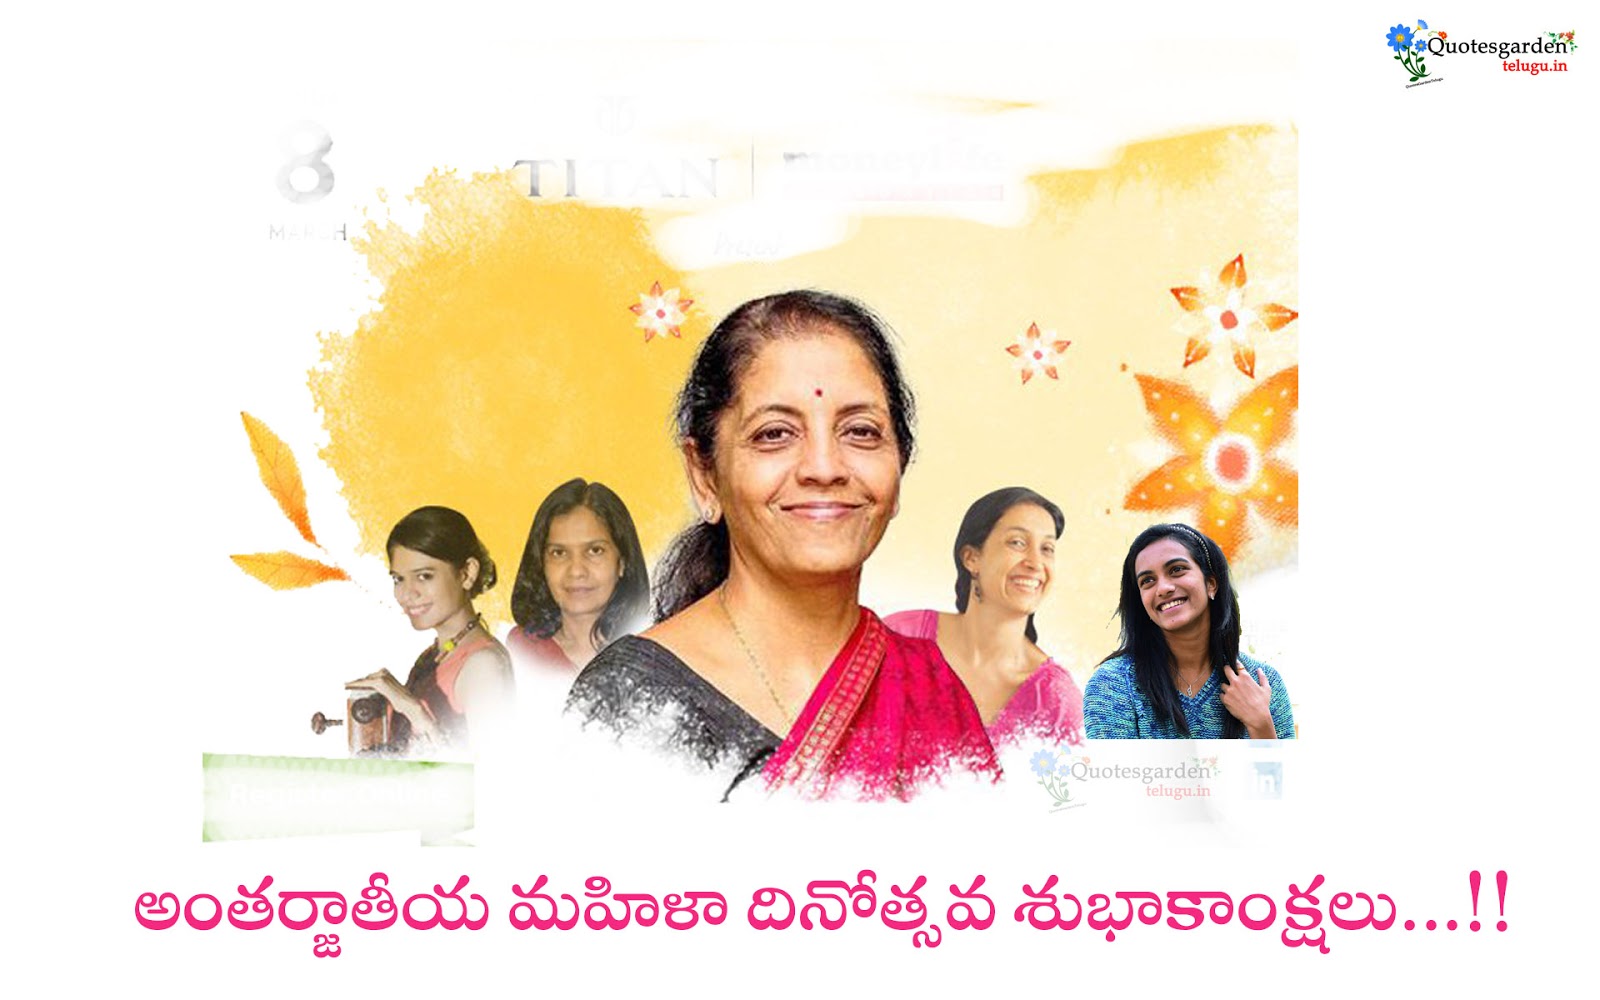 Latest Women's Day wishes images in Telugu greetings | QUOTES GARDEN ...